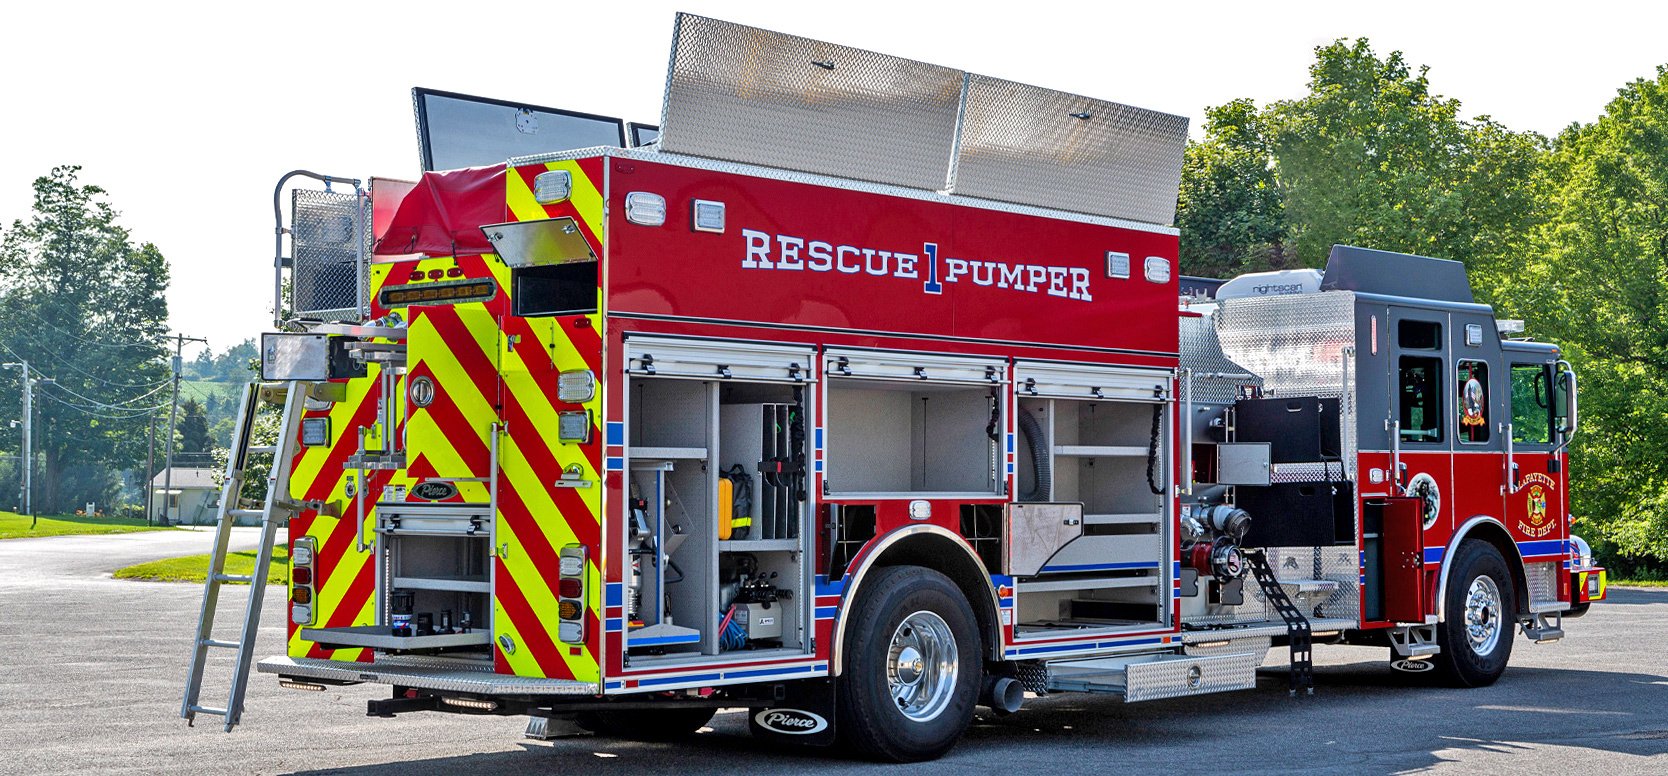 A red fire truck with blue striping is positioned to show the top access ladder at the rear of the truck and open hatch and body compartments.